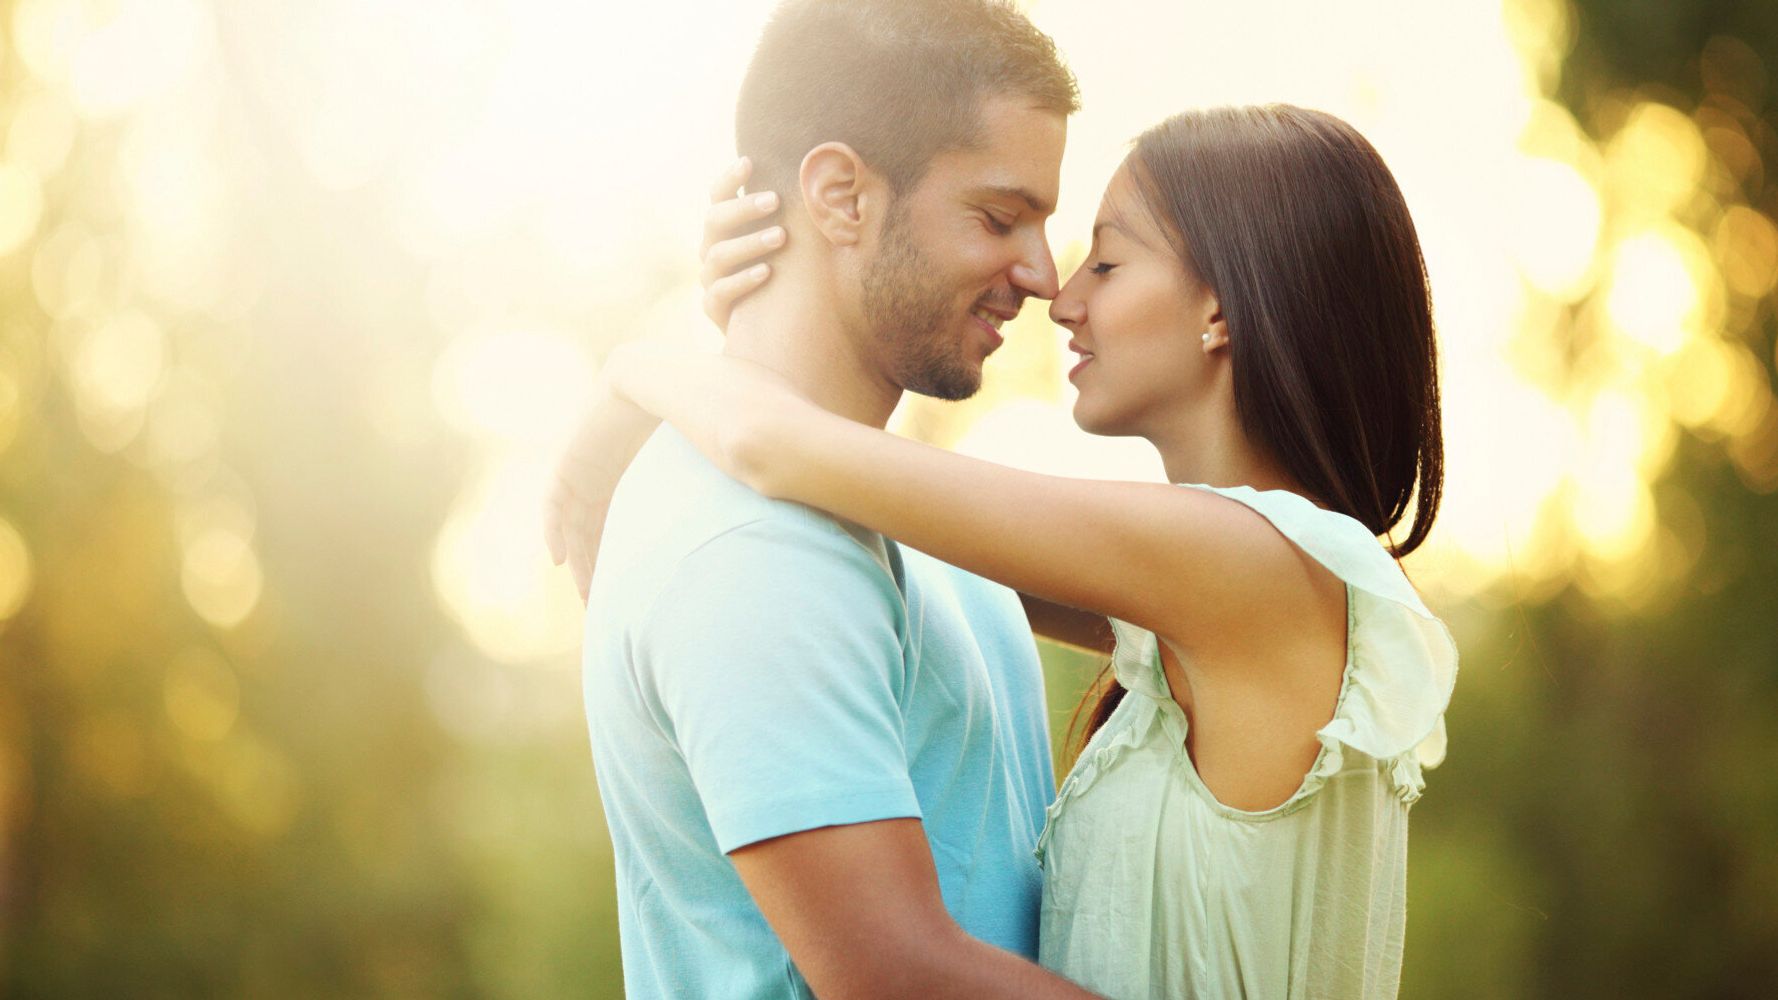 10 Kissing Facts Some Might Make You Think Twice About Locking Lips